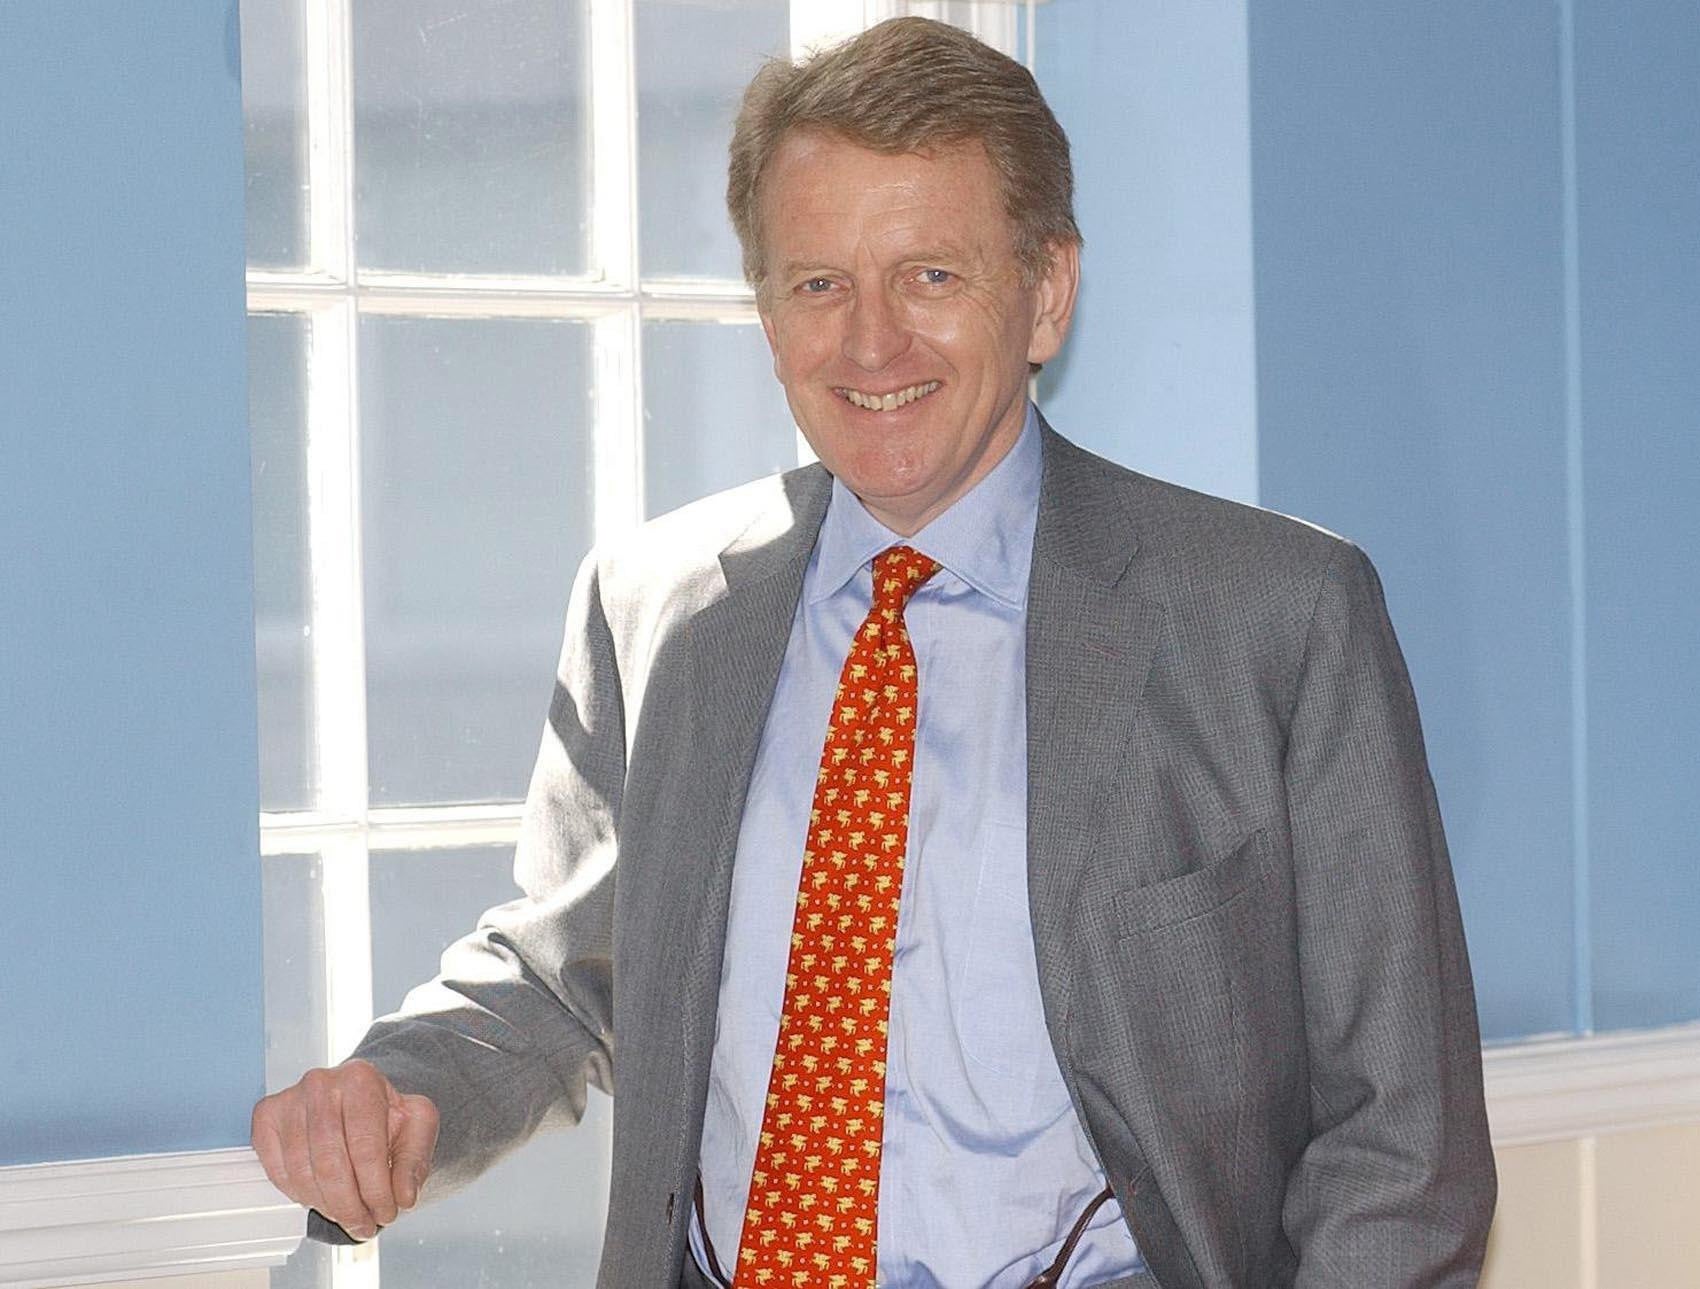 Sir Christopher served as ambassador to the United States for six years from 1997